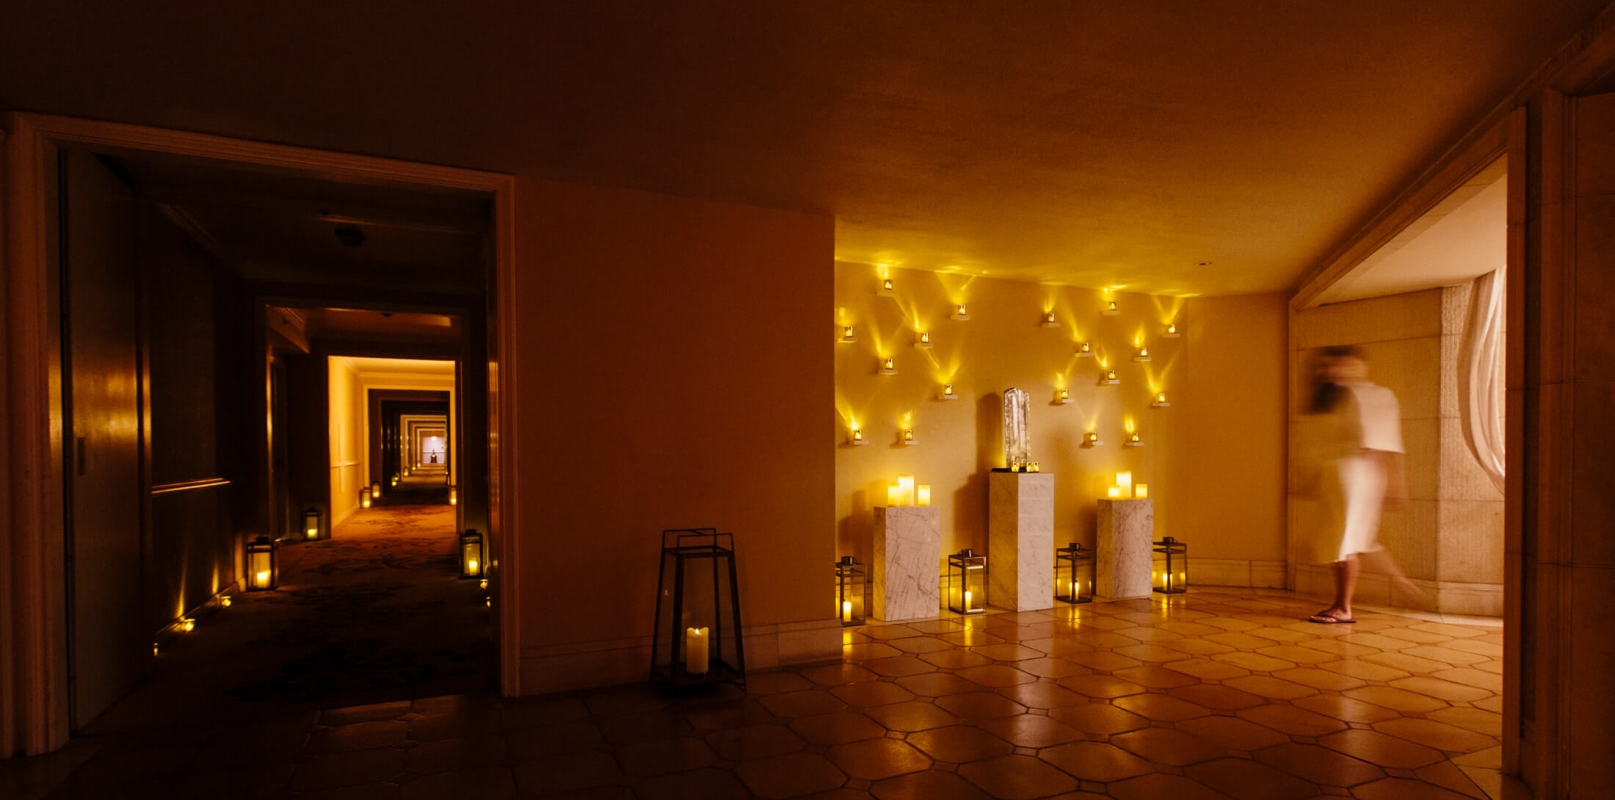 wall of candles flicker inside the spa